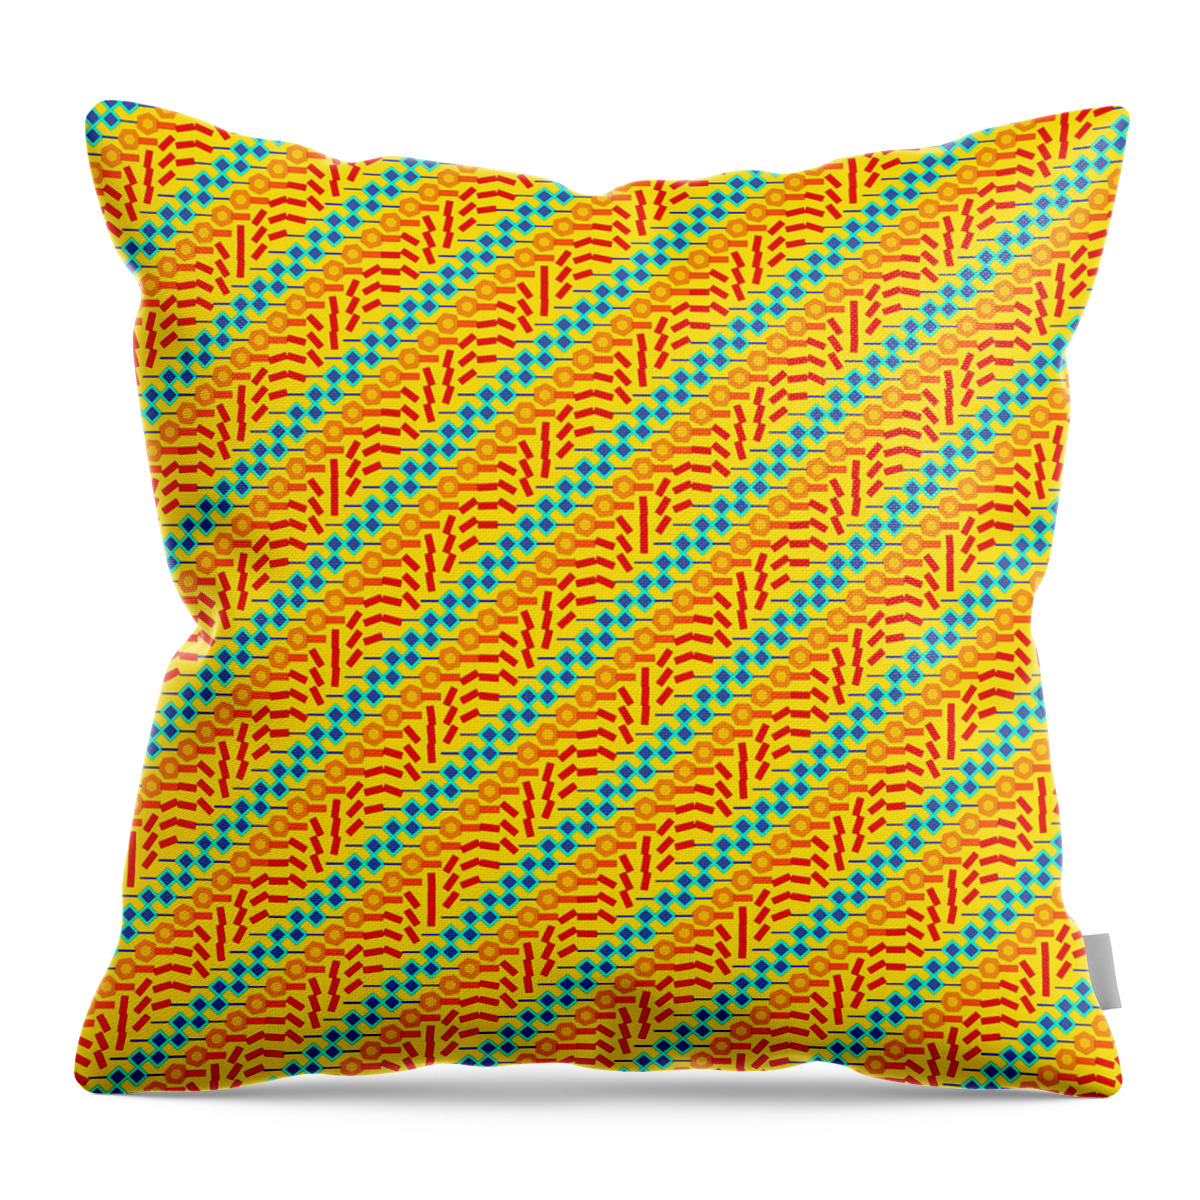 Abstract Throw Pillow featuring the digital art Pattern 3 by Marko Sabotin